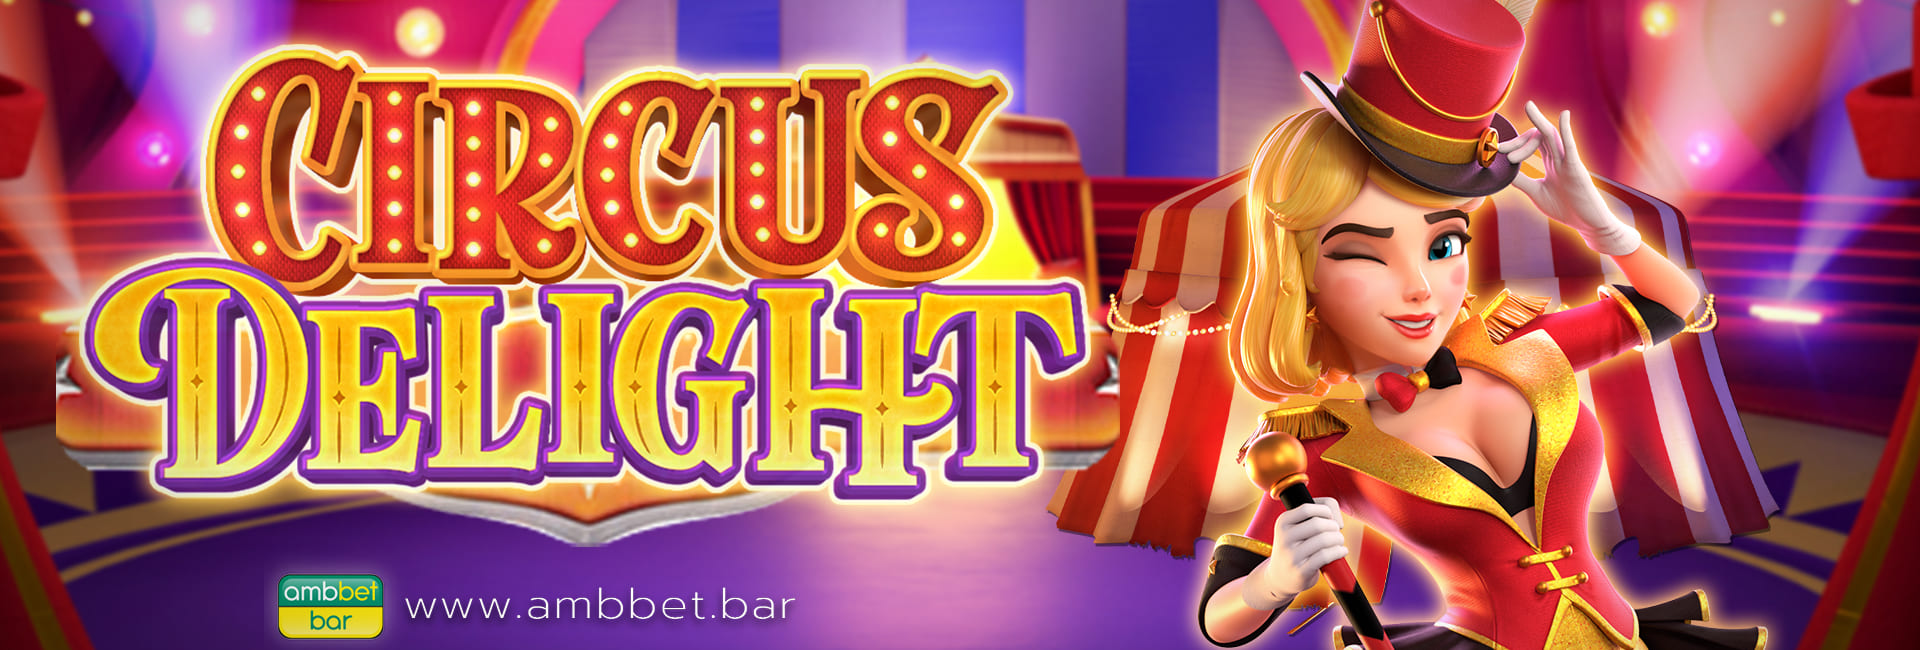 Circus Delight banner